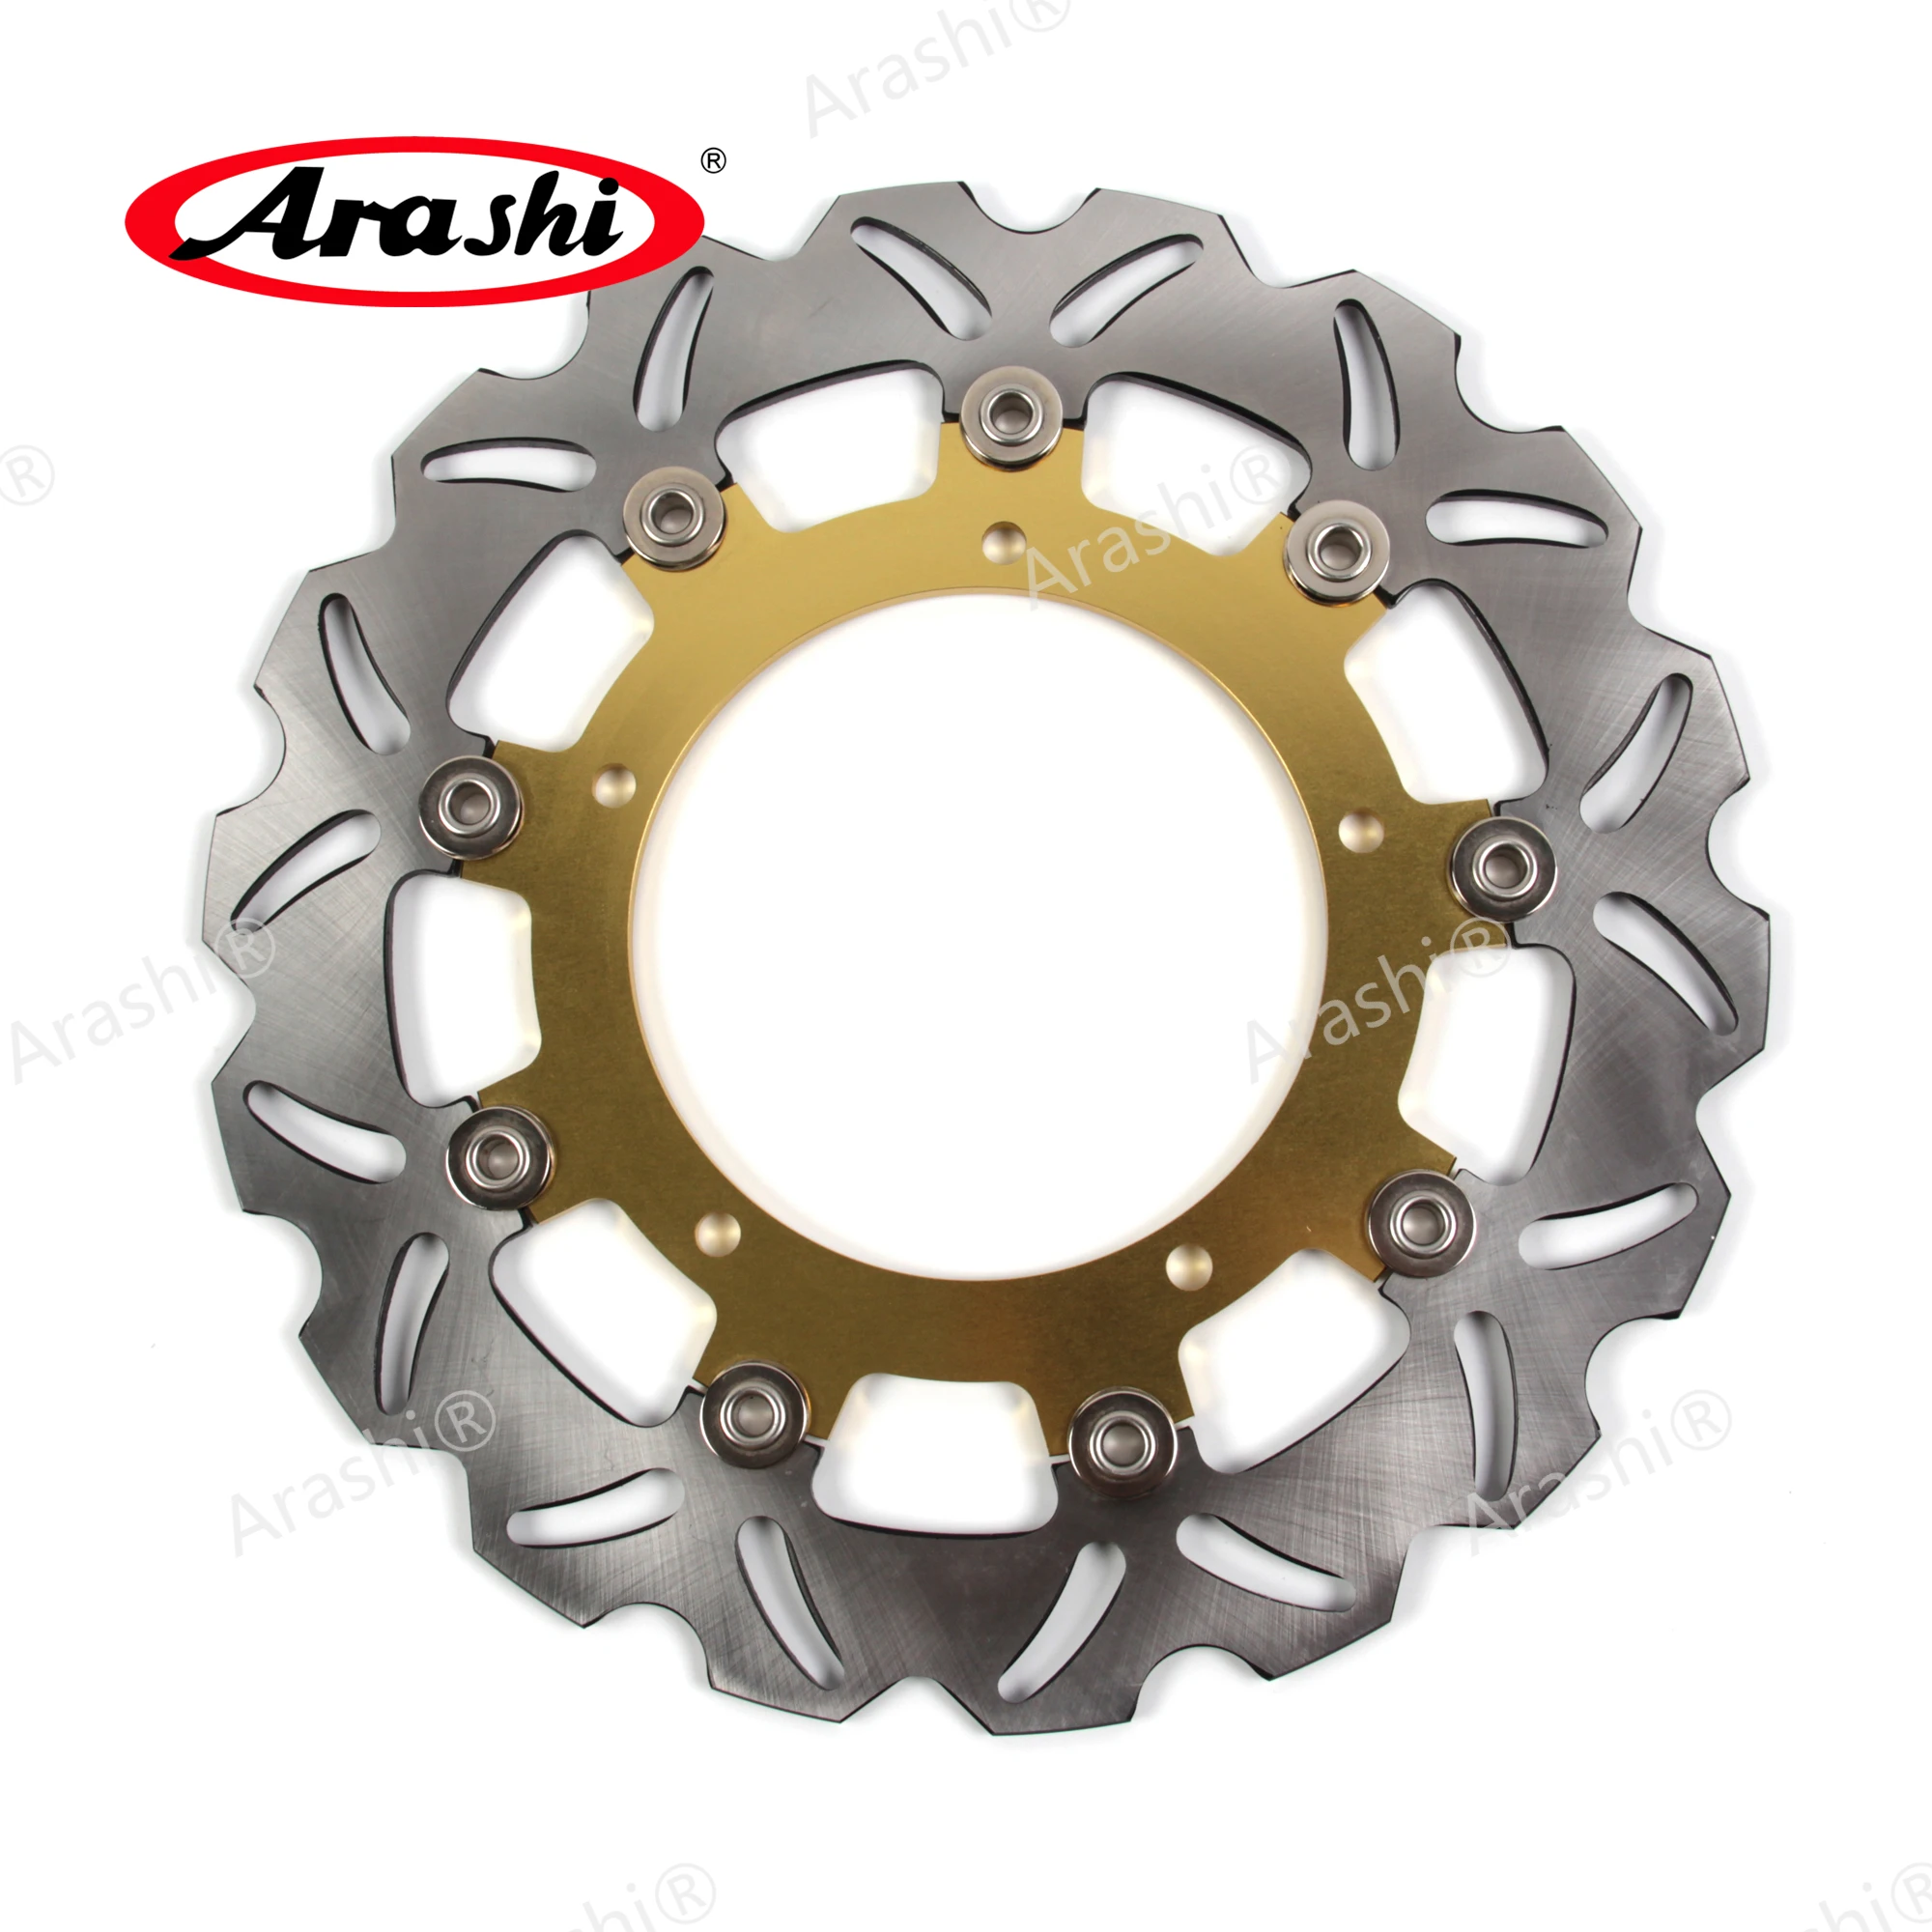 For Yamaha YZF R3 YZF-R3 2015 2016 2017 2018 Front Rear Brake Discs Rotors